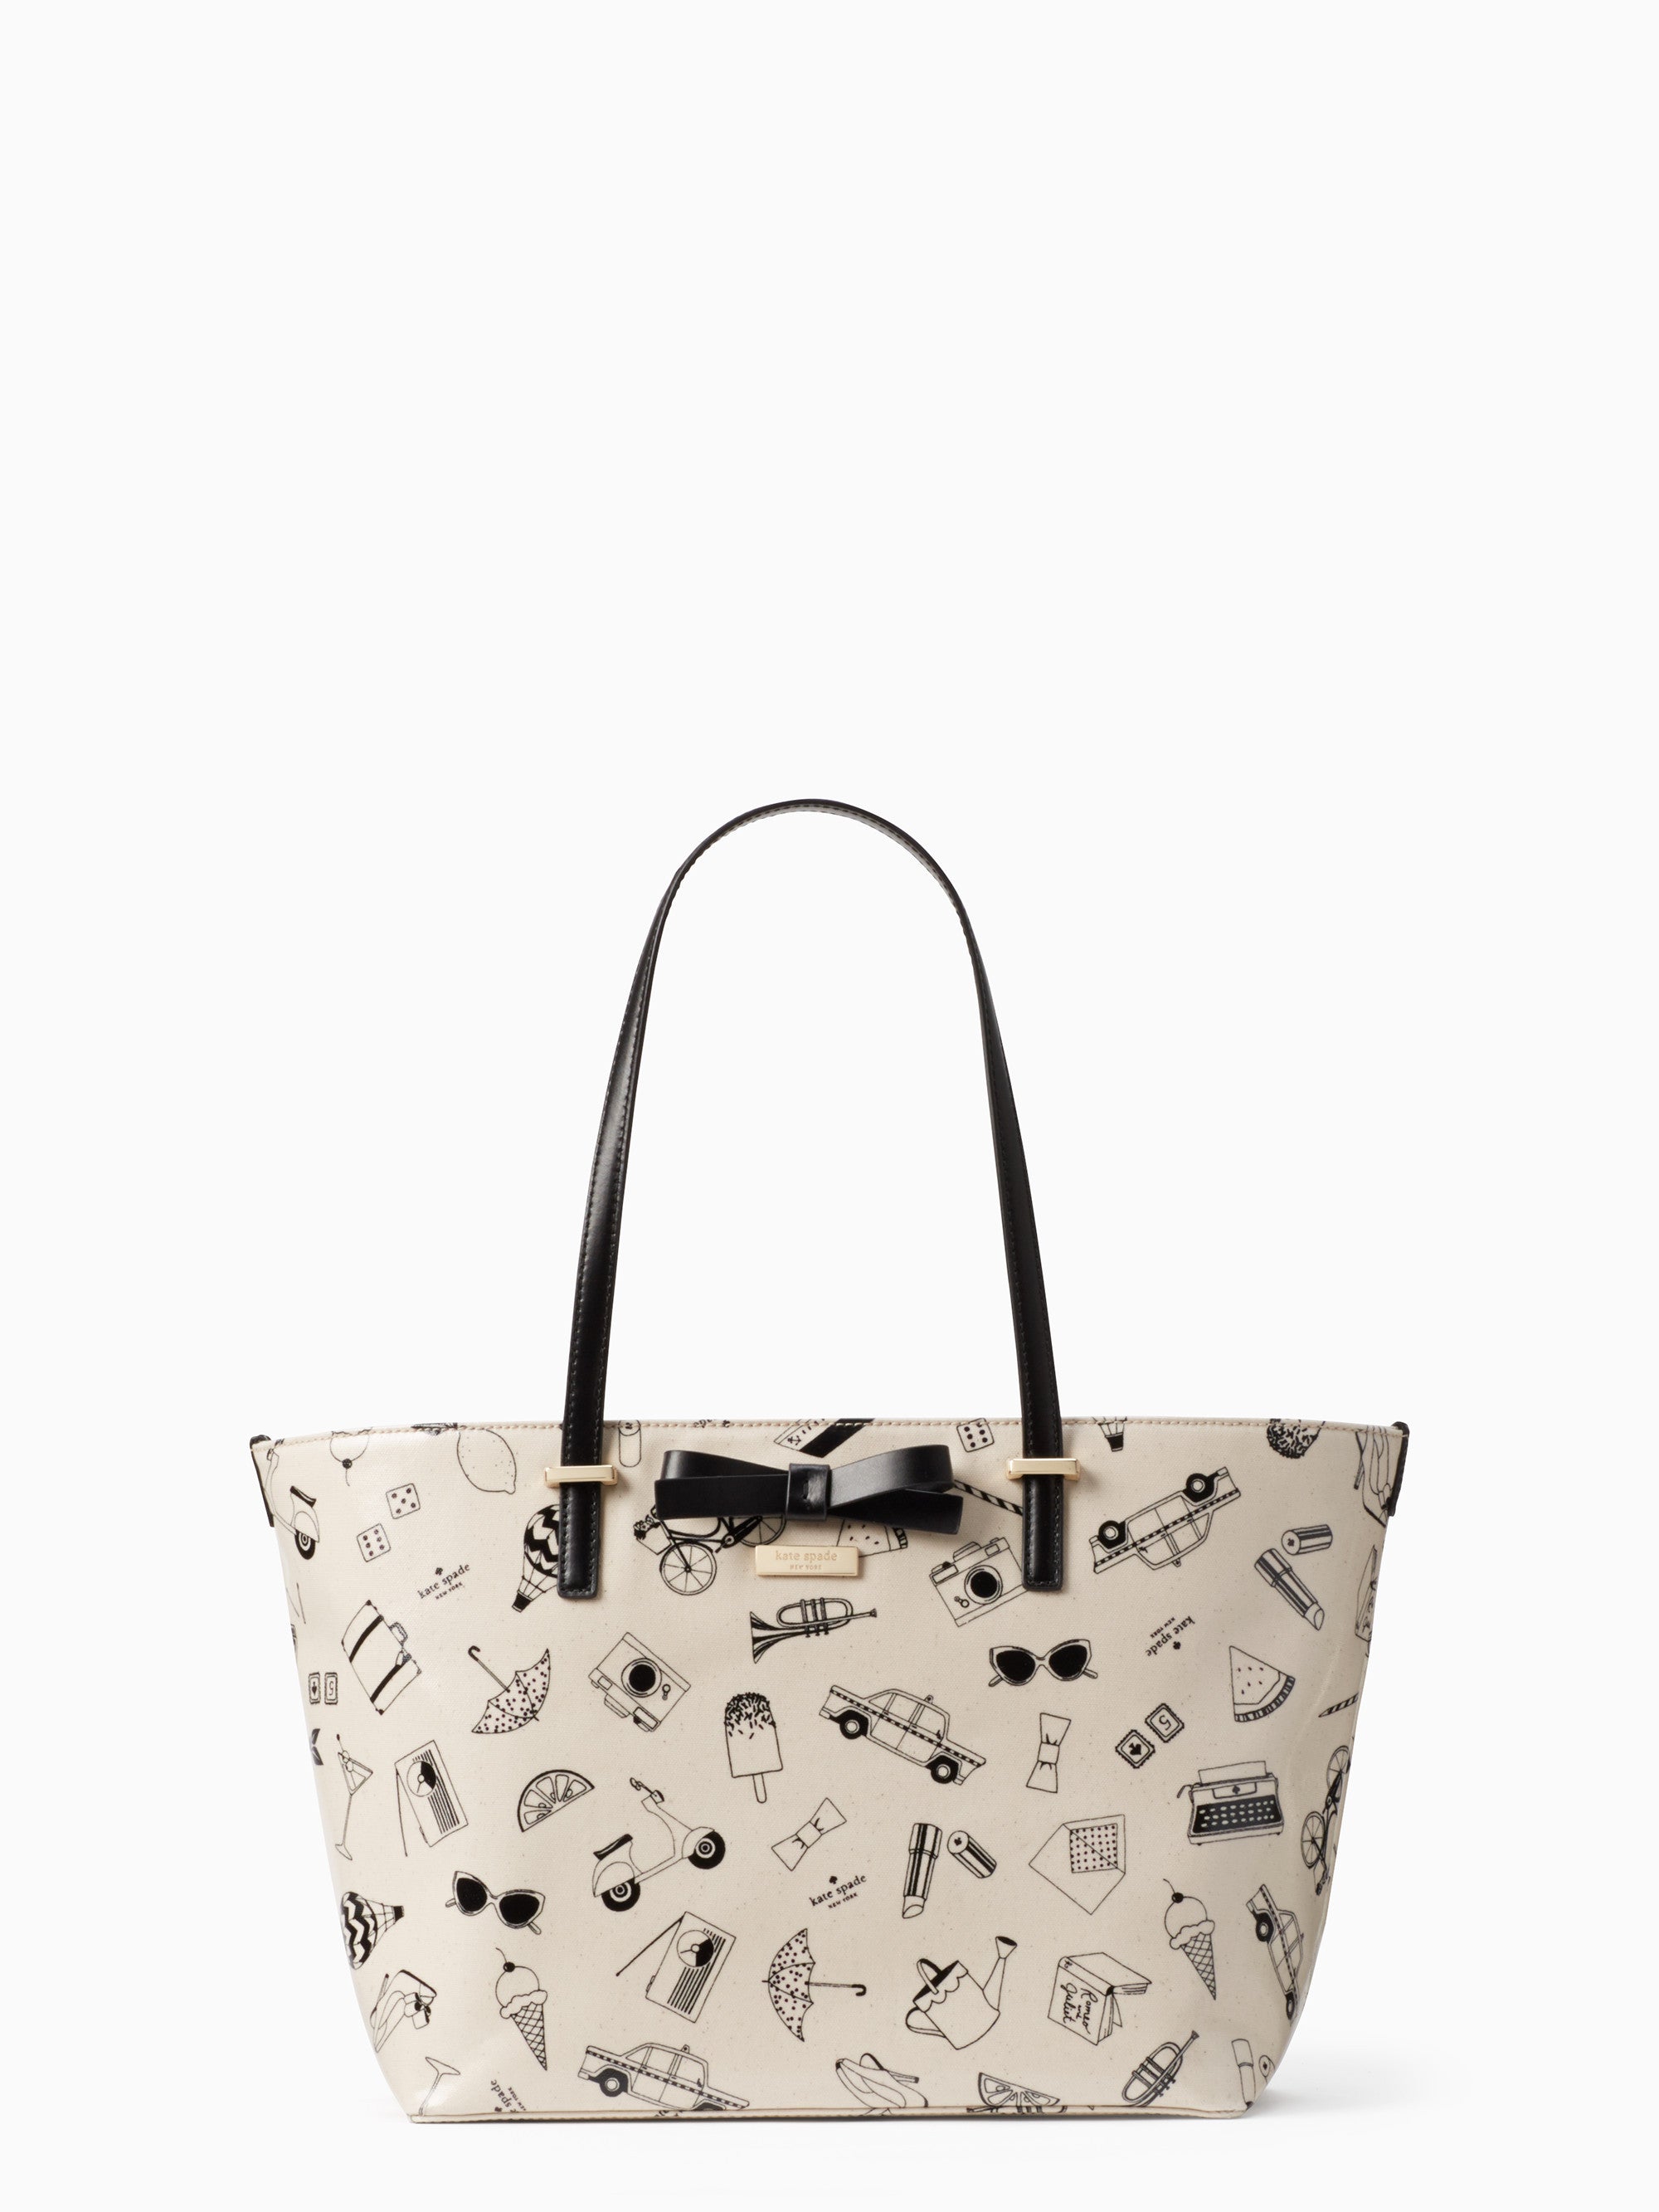 Kate Spade New York Faux Fur Leather-Trimmed Tote - Black Totes